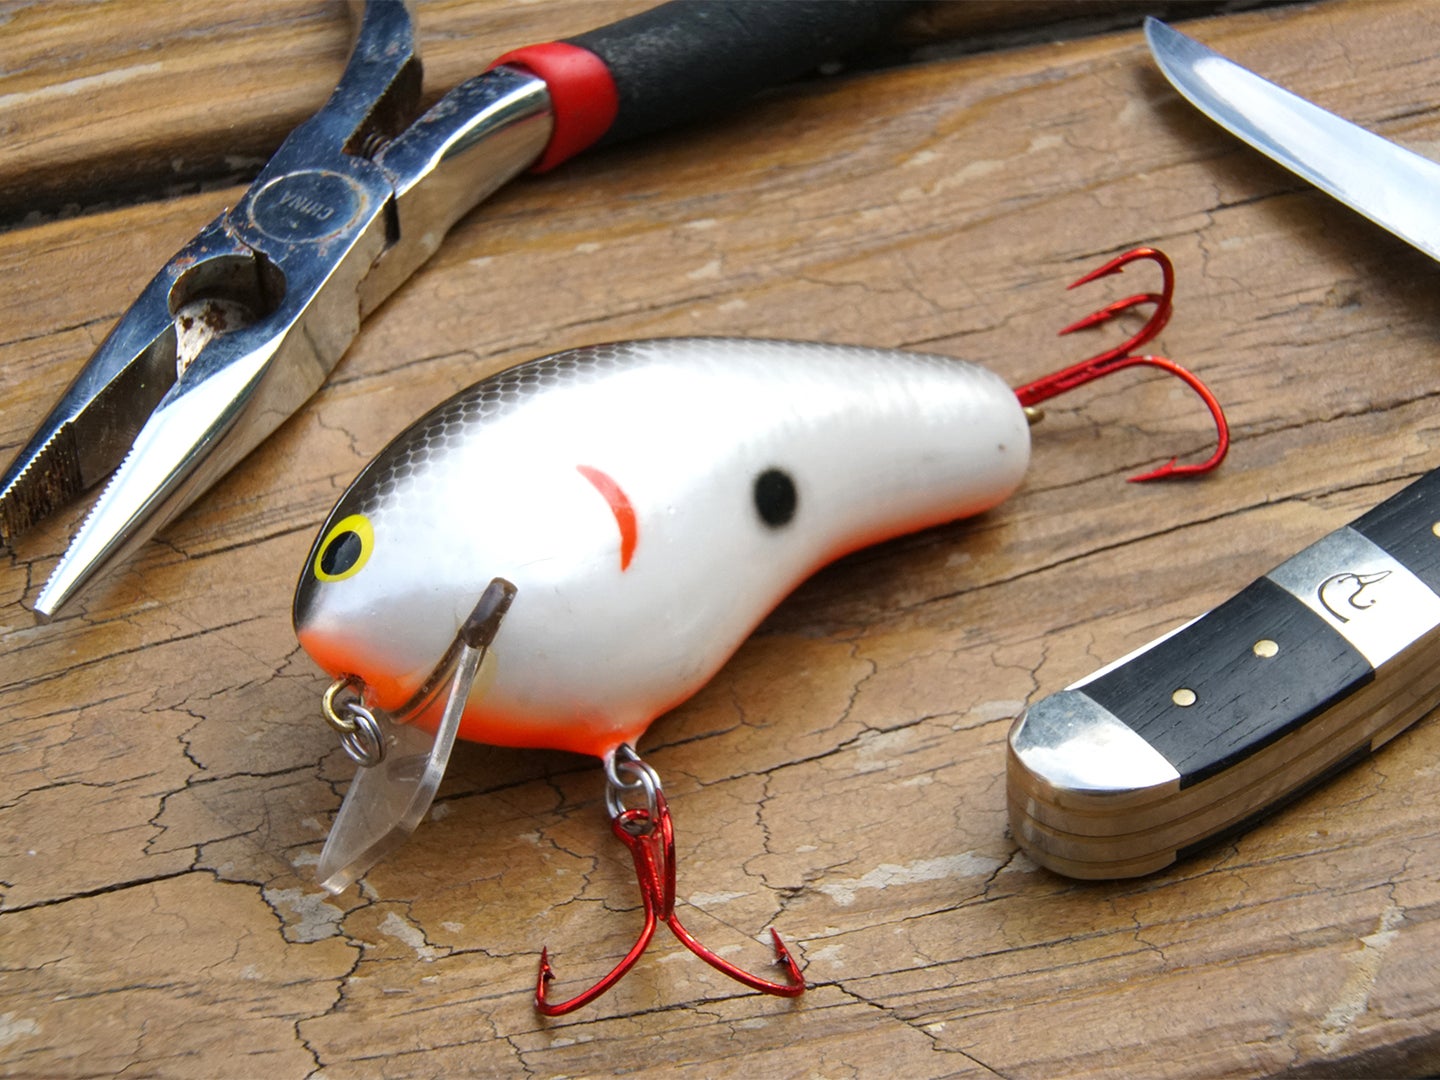 A crankbait, pliers, and knife on a wooden table.